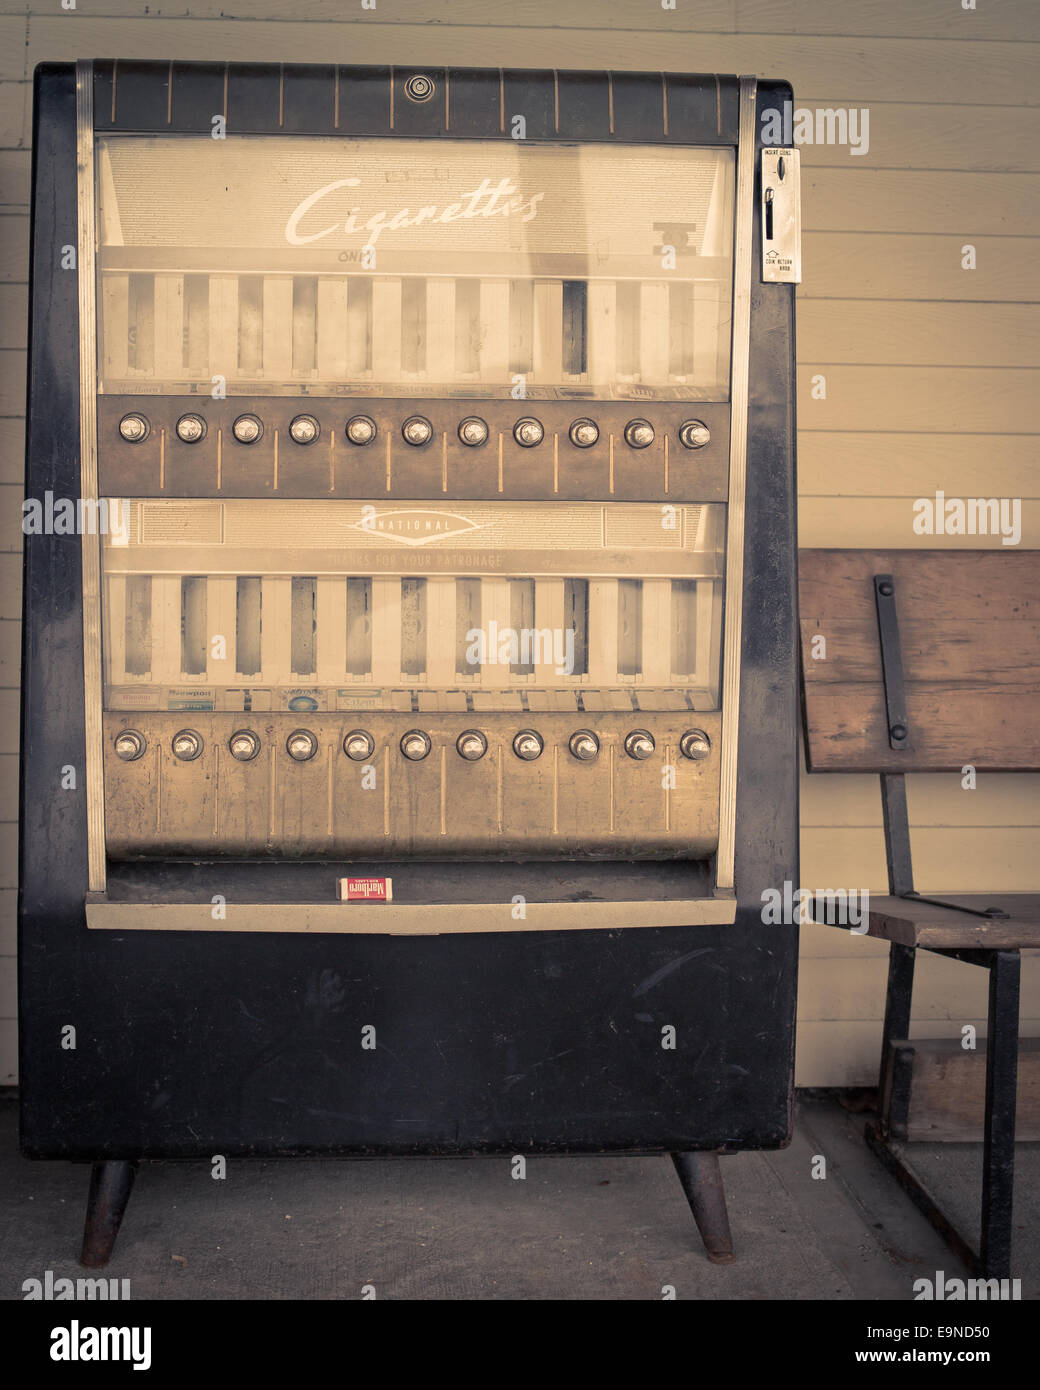 An old cigarette coin-op vending machine. Stock Photo